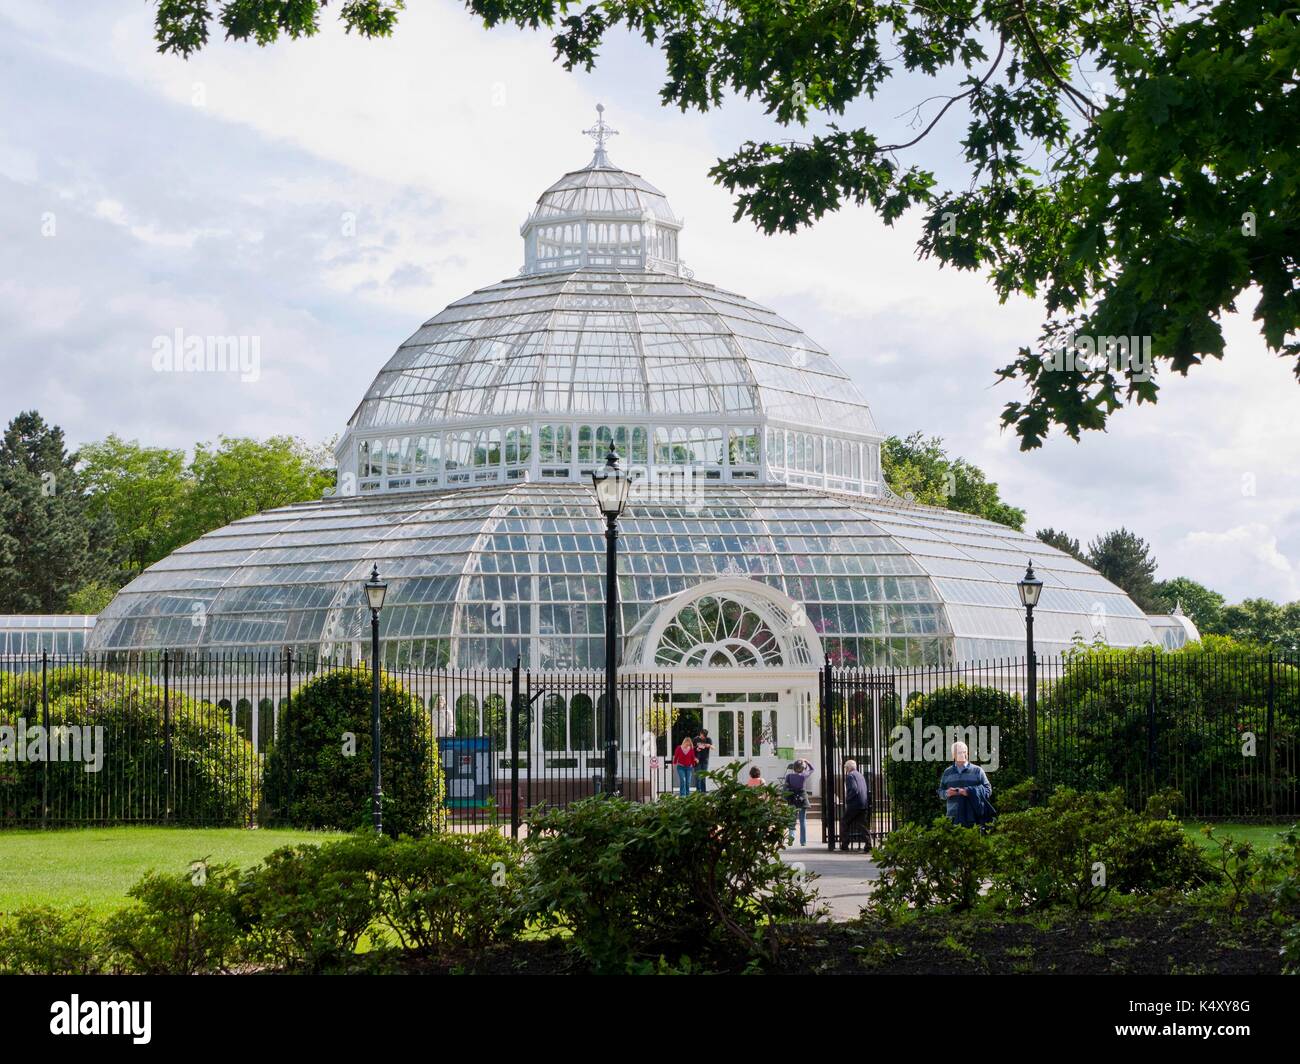 The magnificent iron and glass Palm House, Sefton Park, Liverpool, built 1896 by Mackenzie and Moncur, Glasgow, and gifted by Henry Yates Thompson. Stock Photo